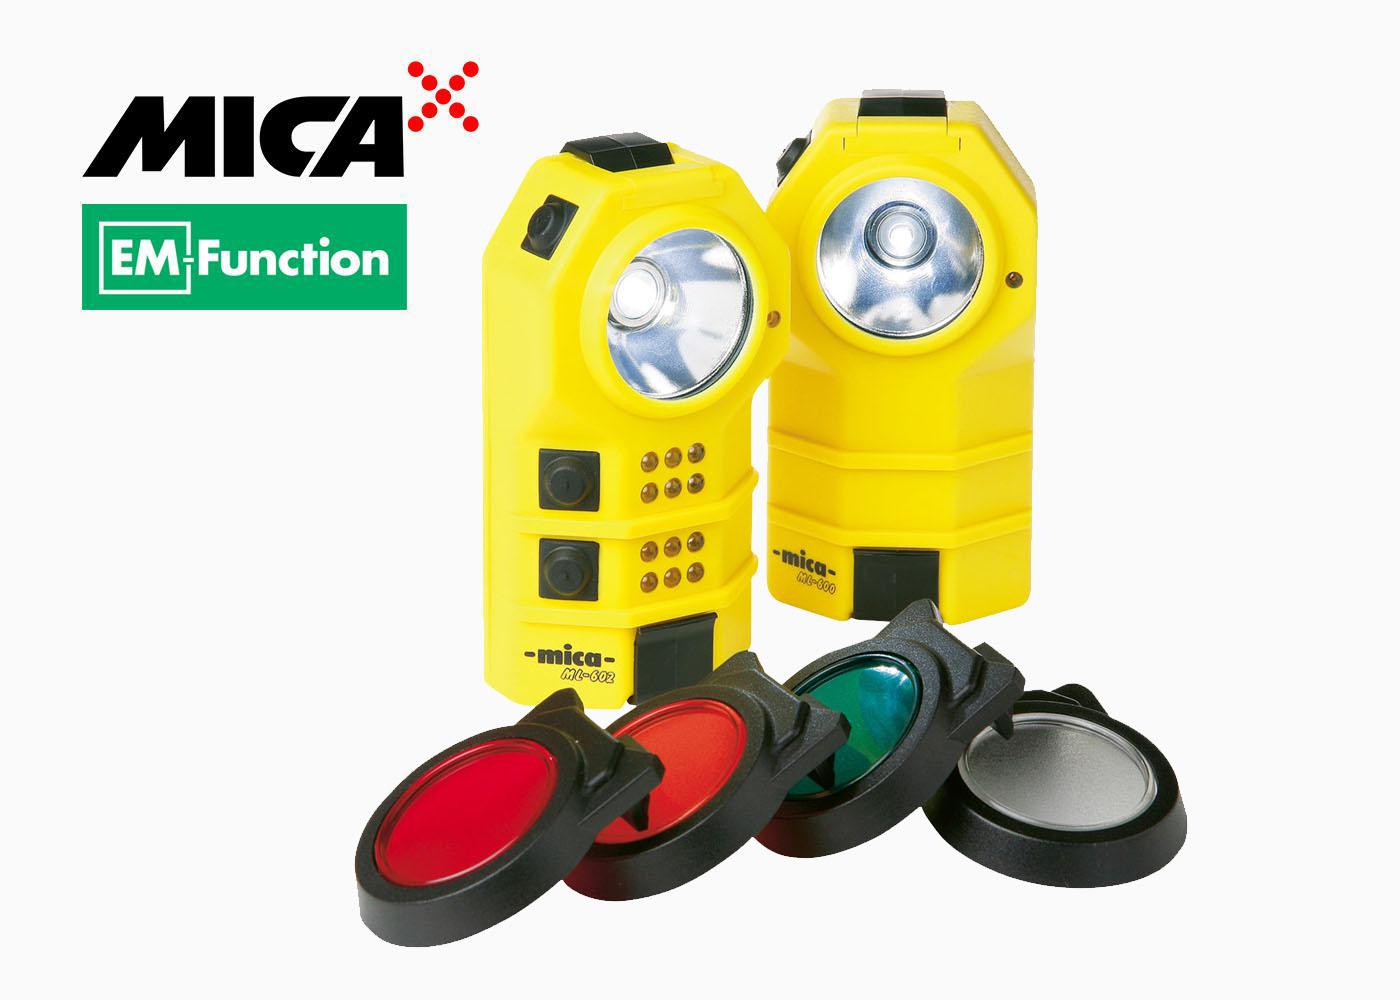 Rechargeable MICA ML-series signalling lamps